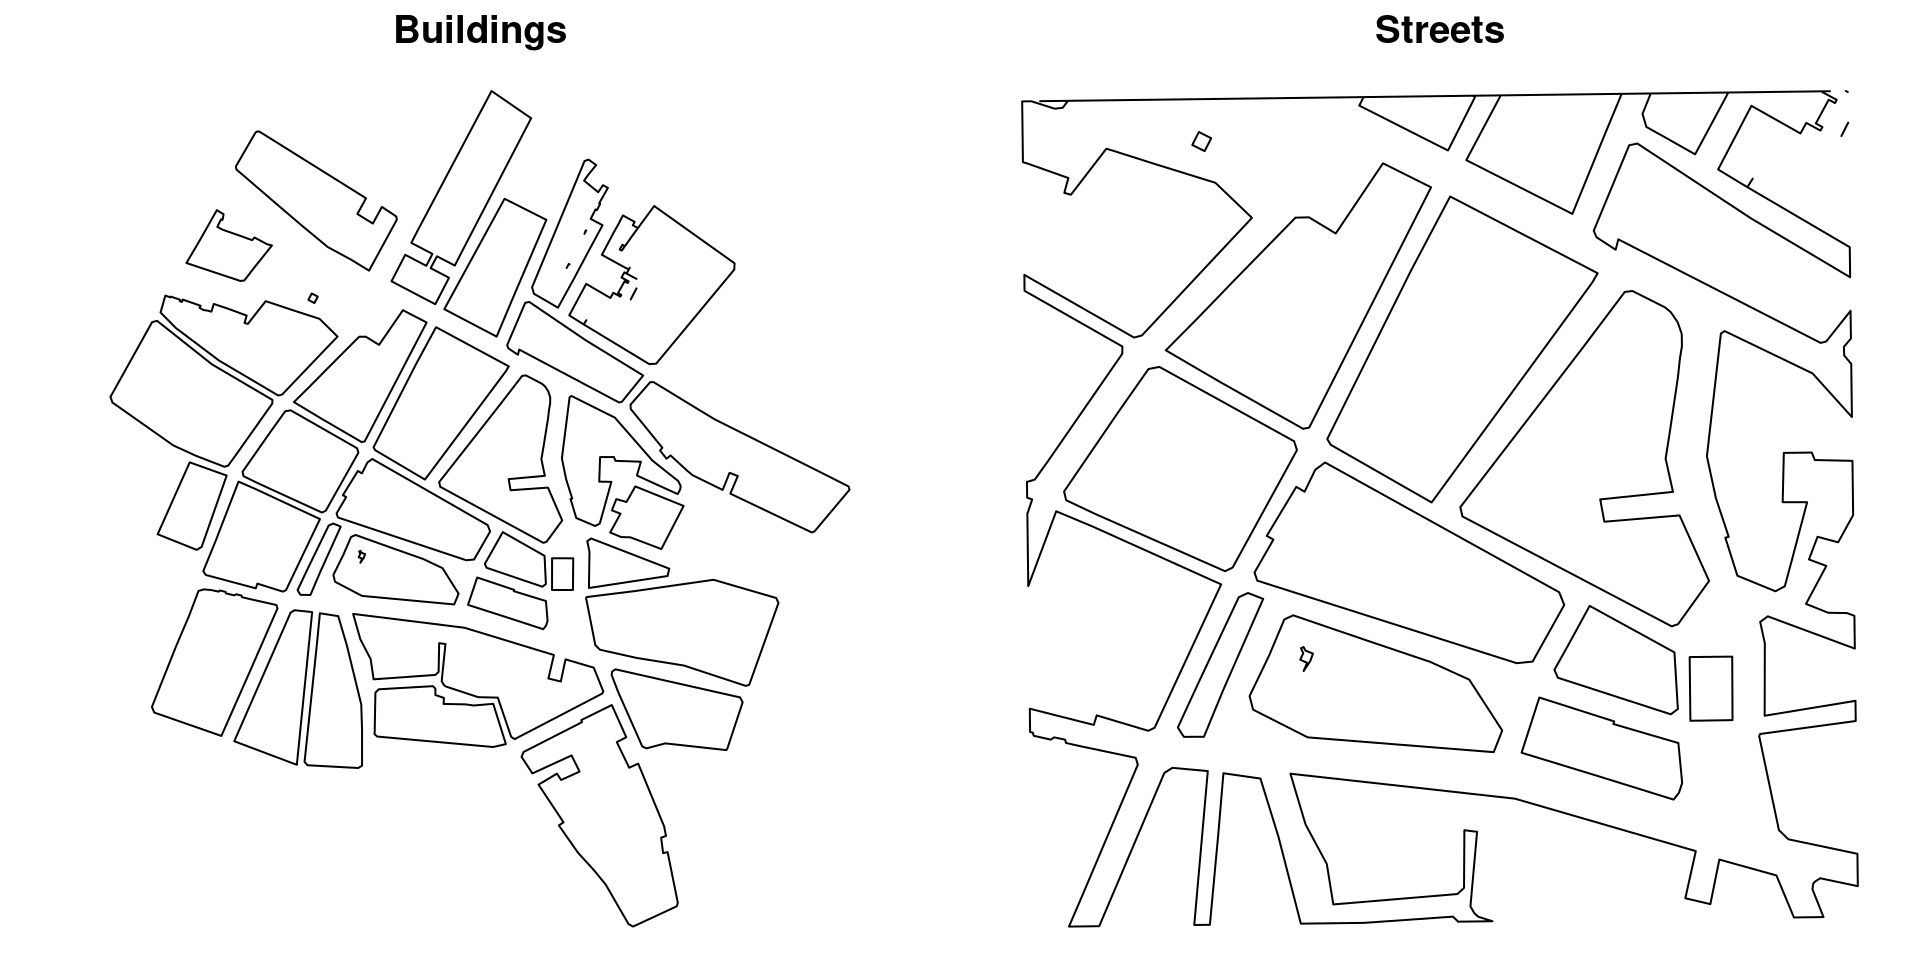 Building and street boundaries obtained from OpenStreetMap.